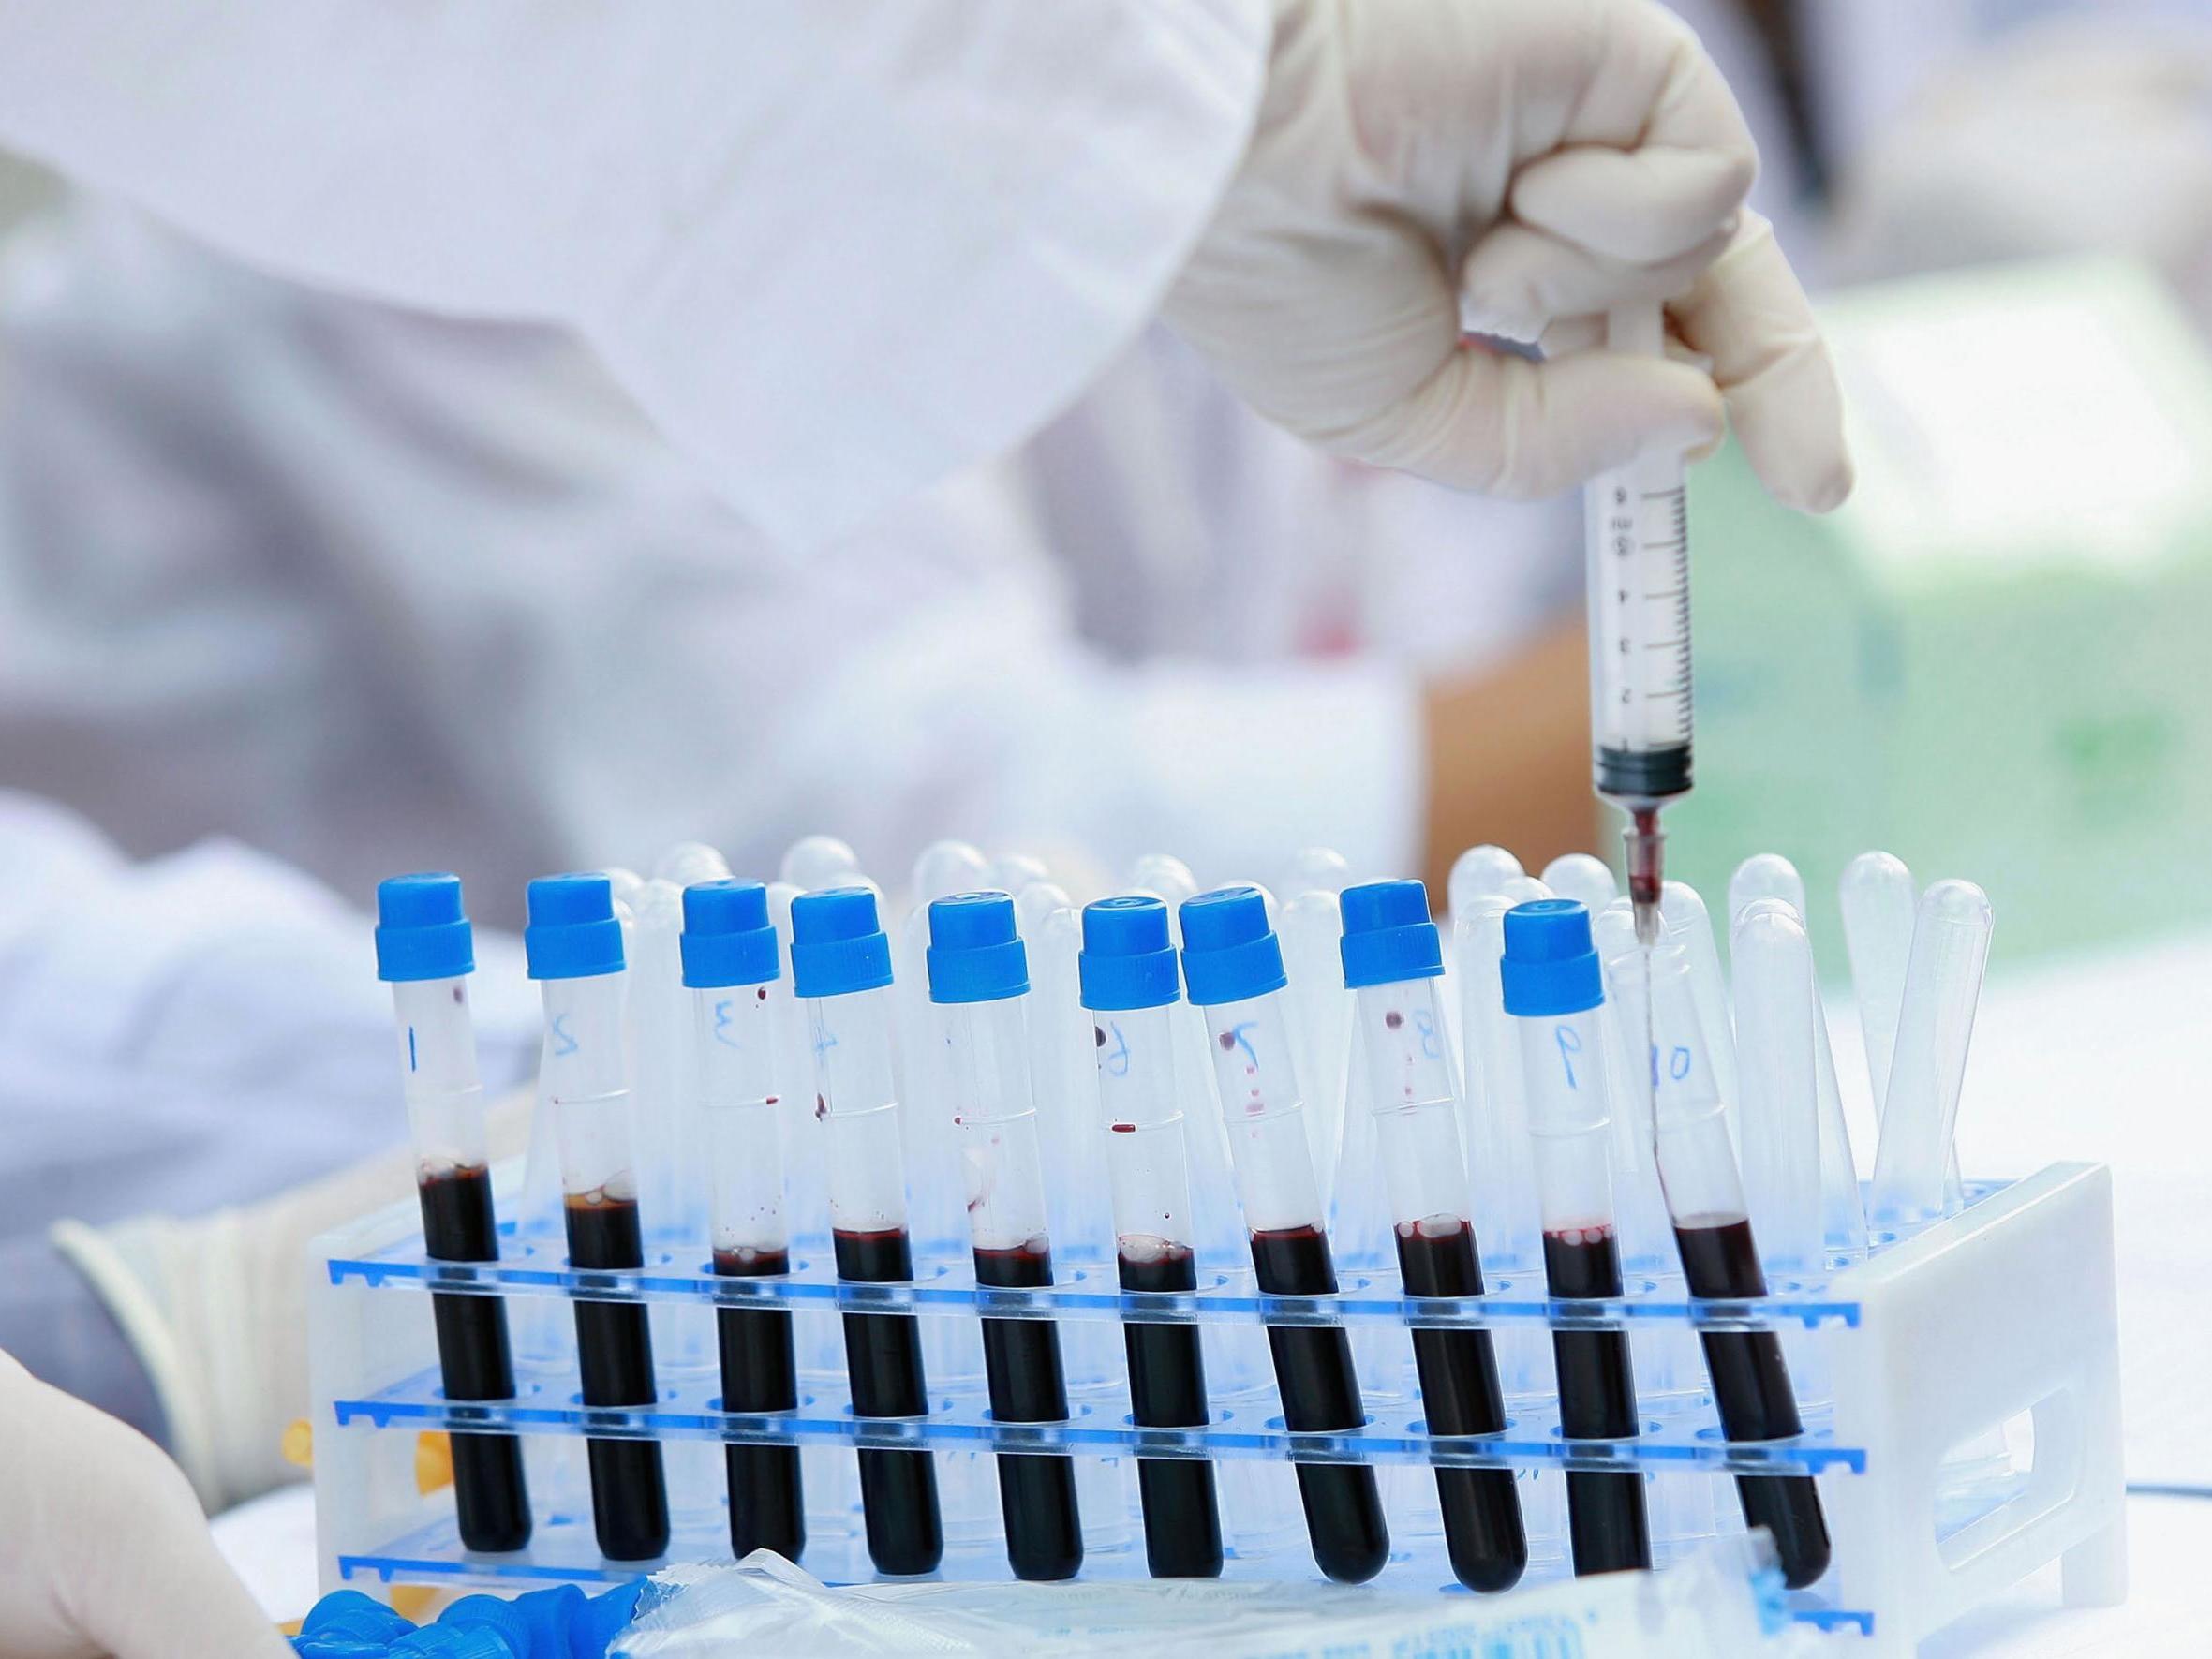 A new blood test is able to detect more than 50 types of cancer